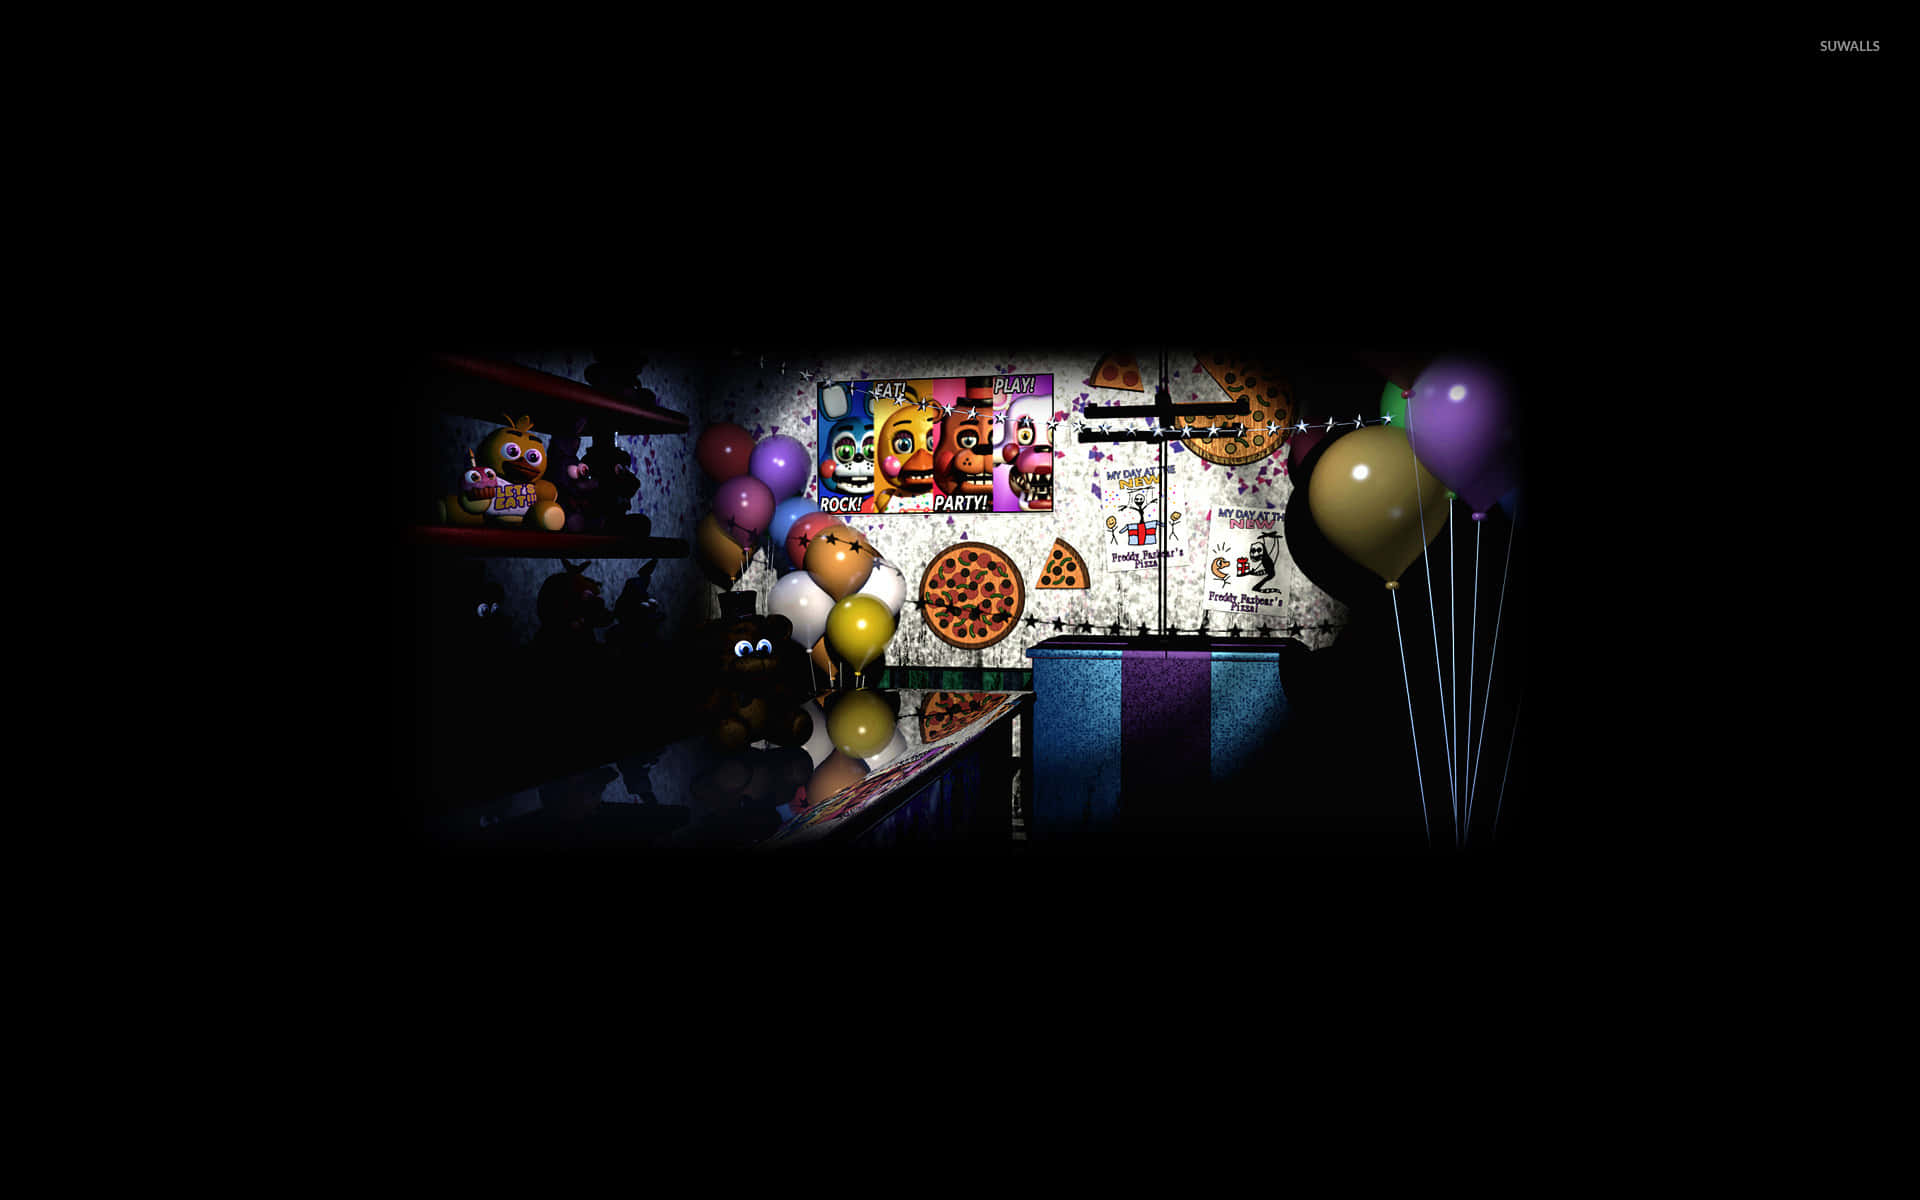 A Dark Room With Balloons And Decorations Wallpaper